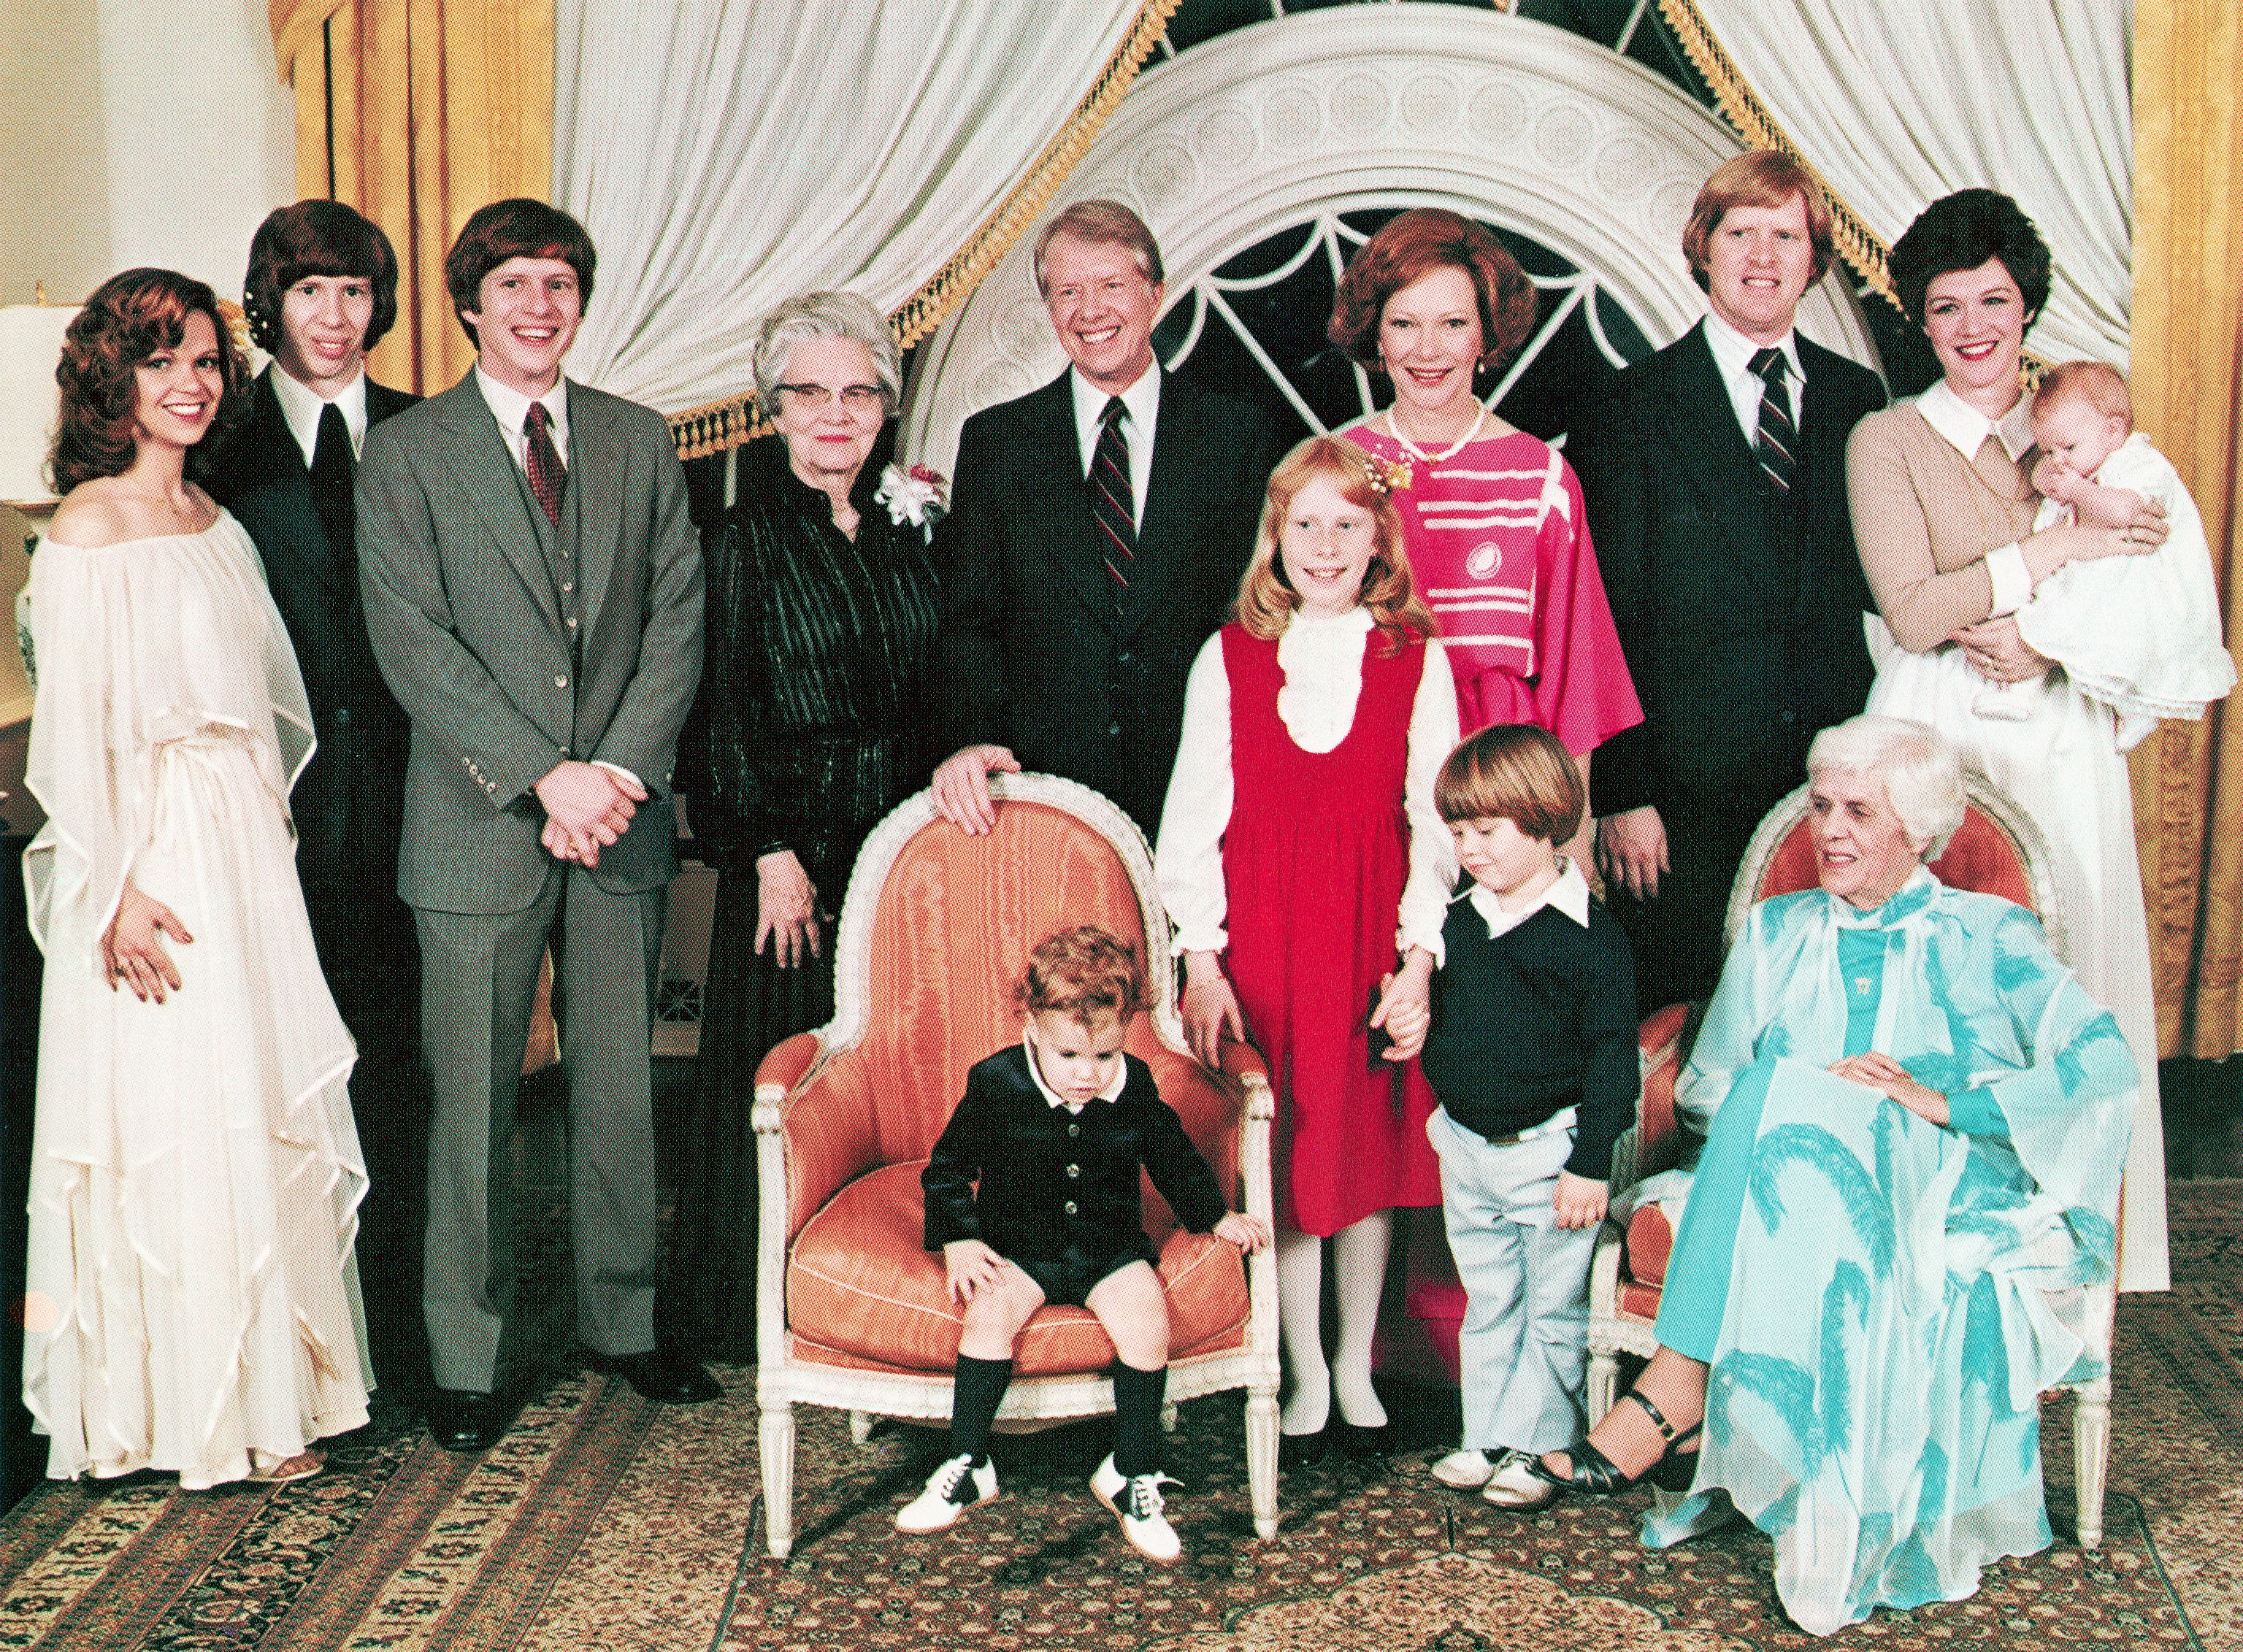 Former President Jimmy Carter and Rosalynn Carter with their family, circa 1977. | Source: Getty Images